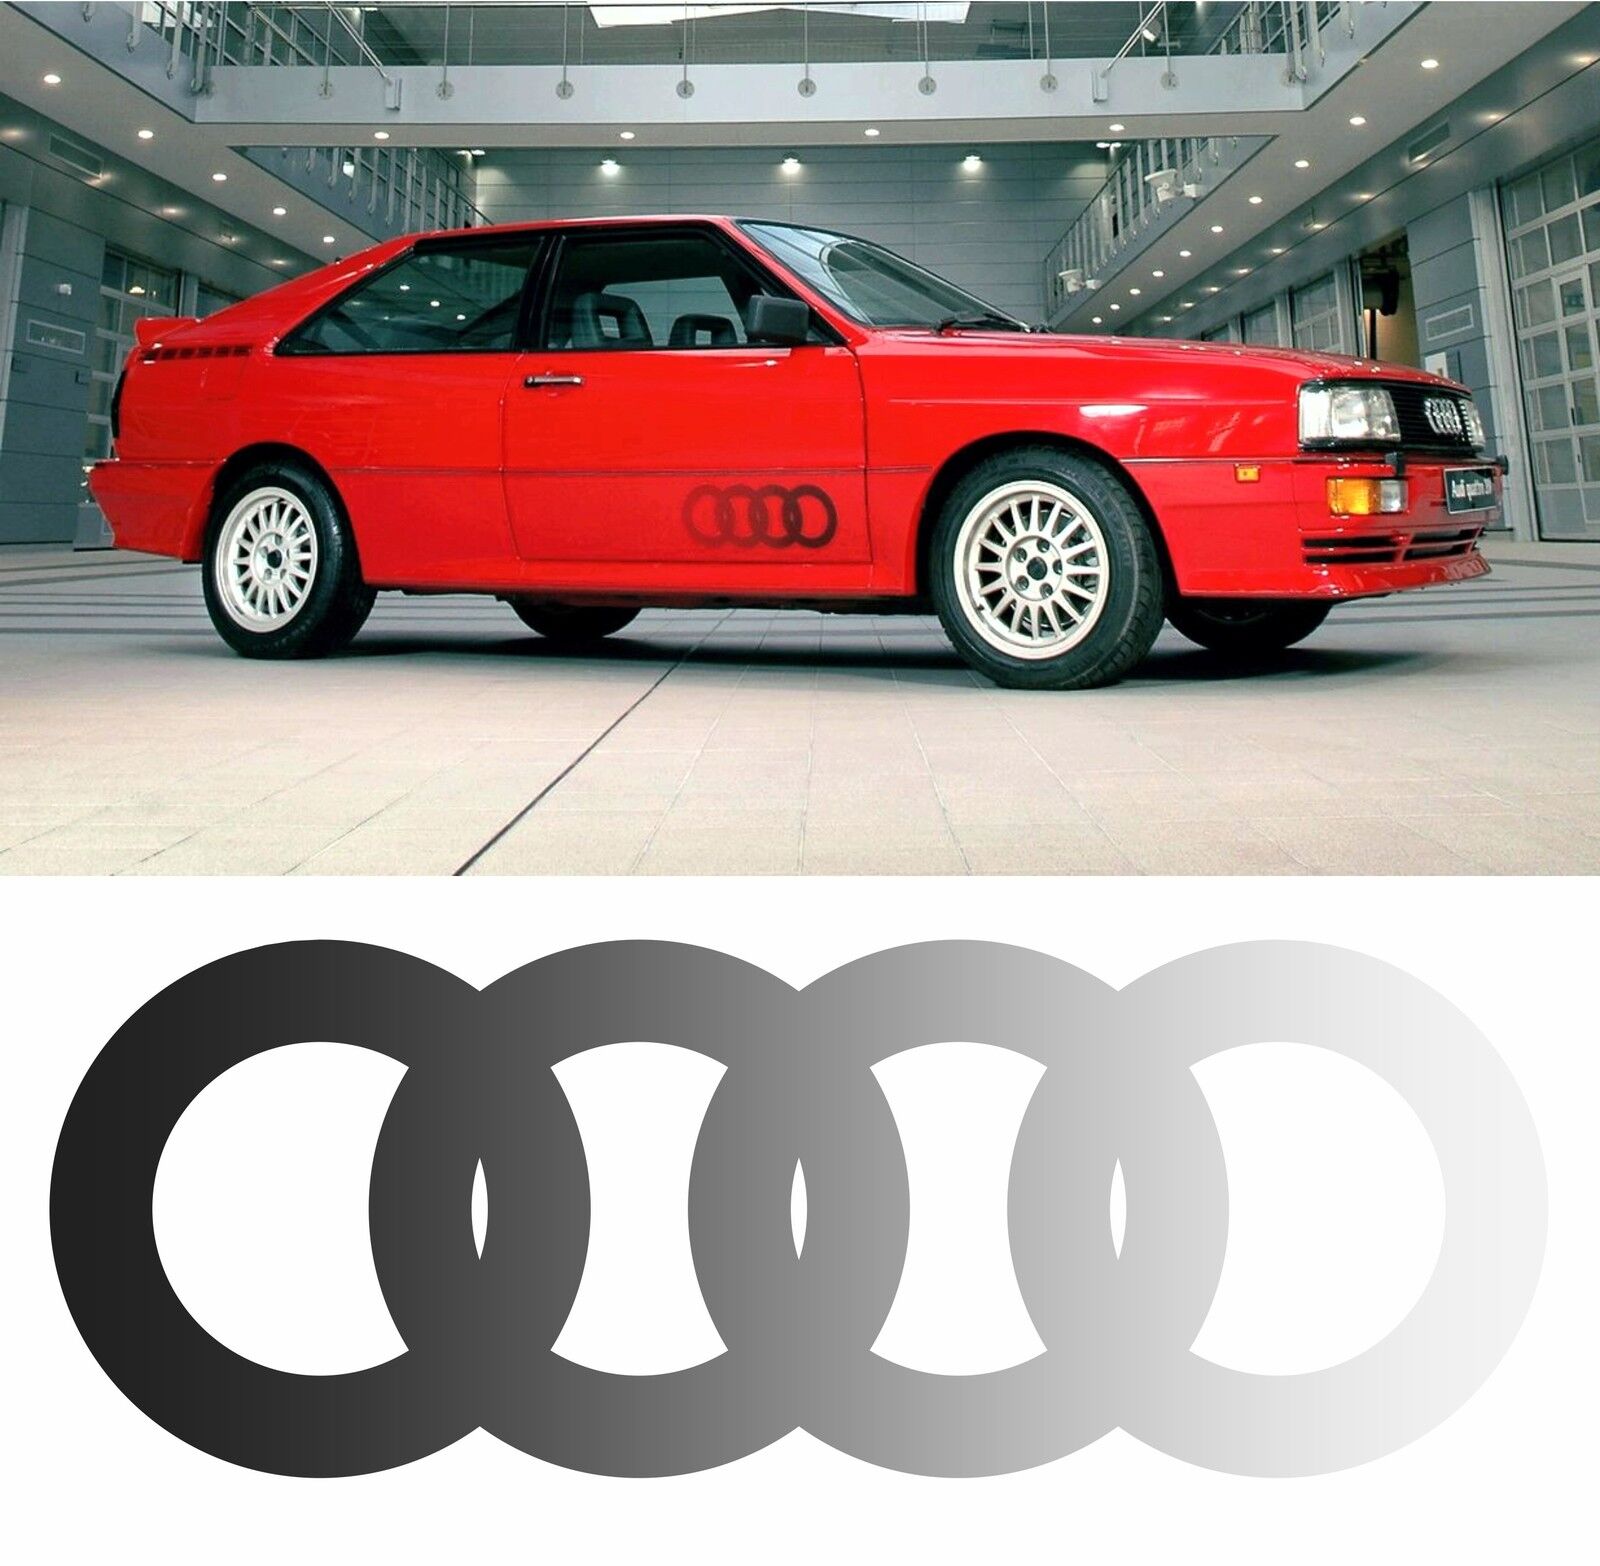 x2 Audi Ur Quattro Door Anello Stickers Laminated with Black Dotted Fade Effect